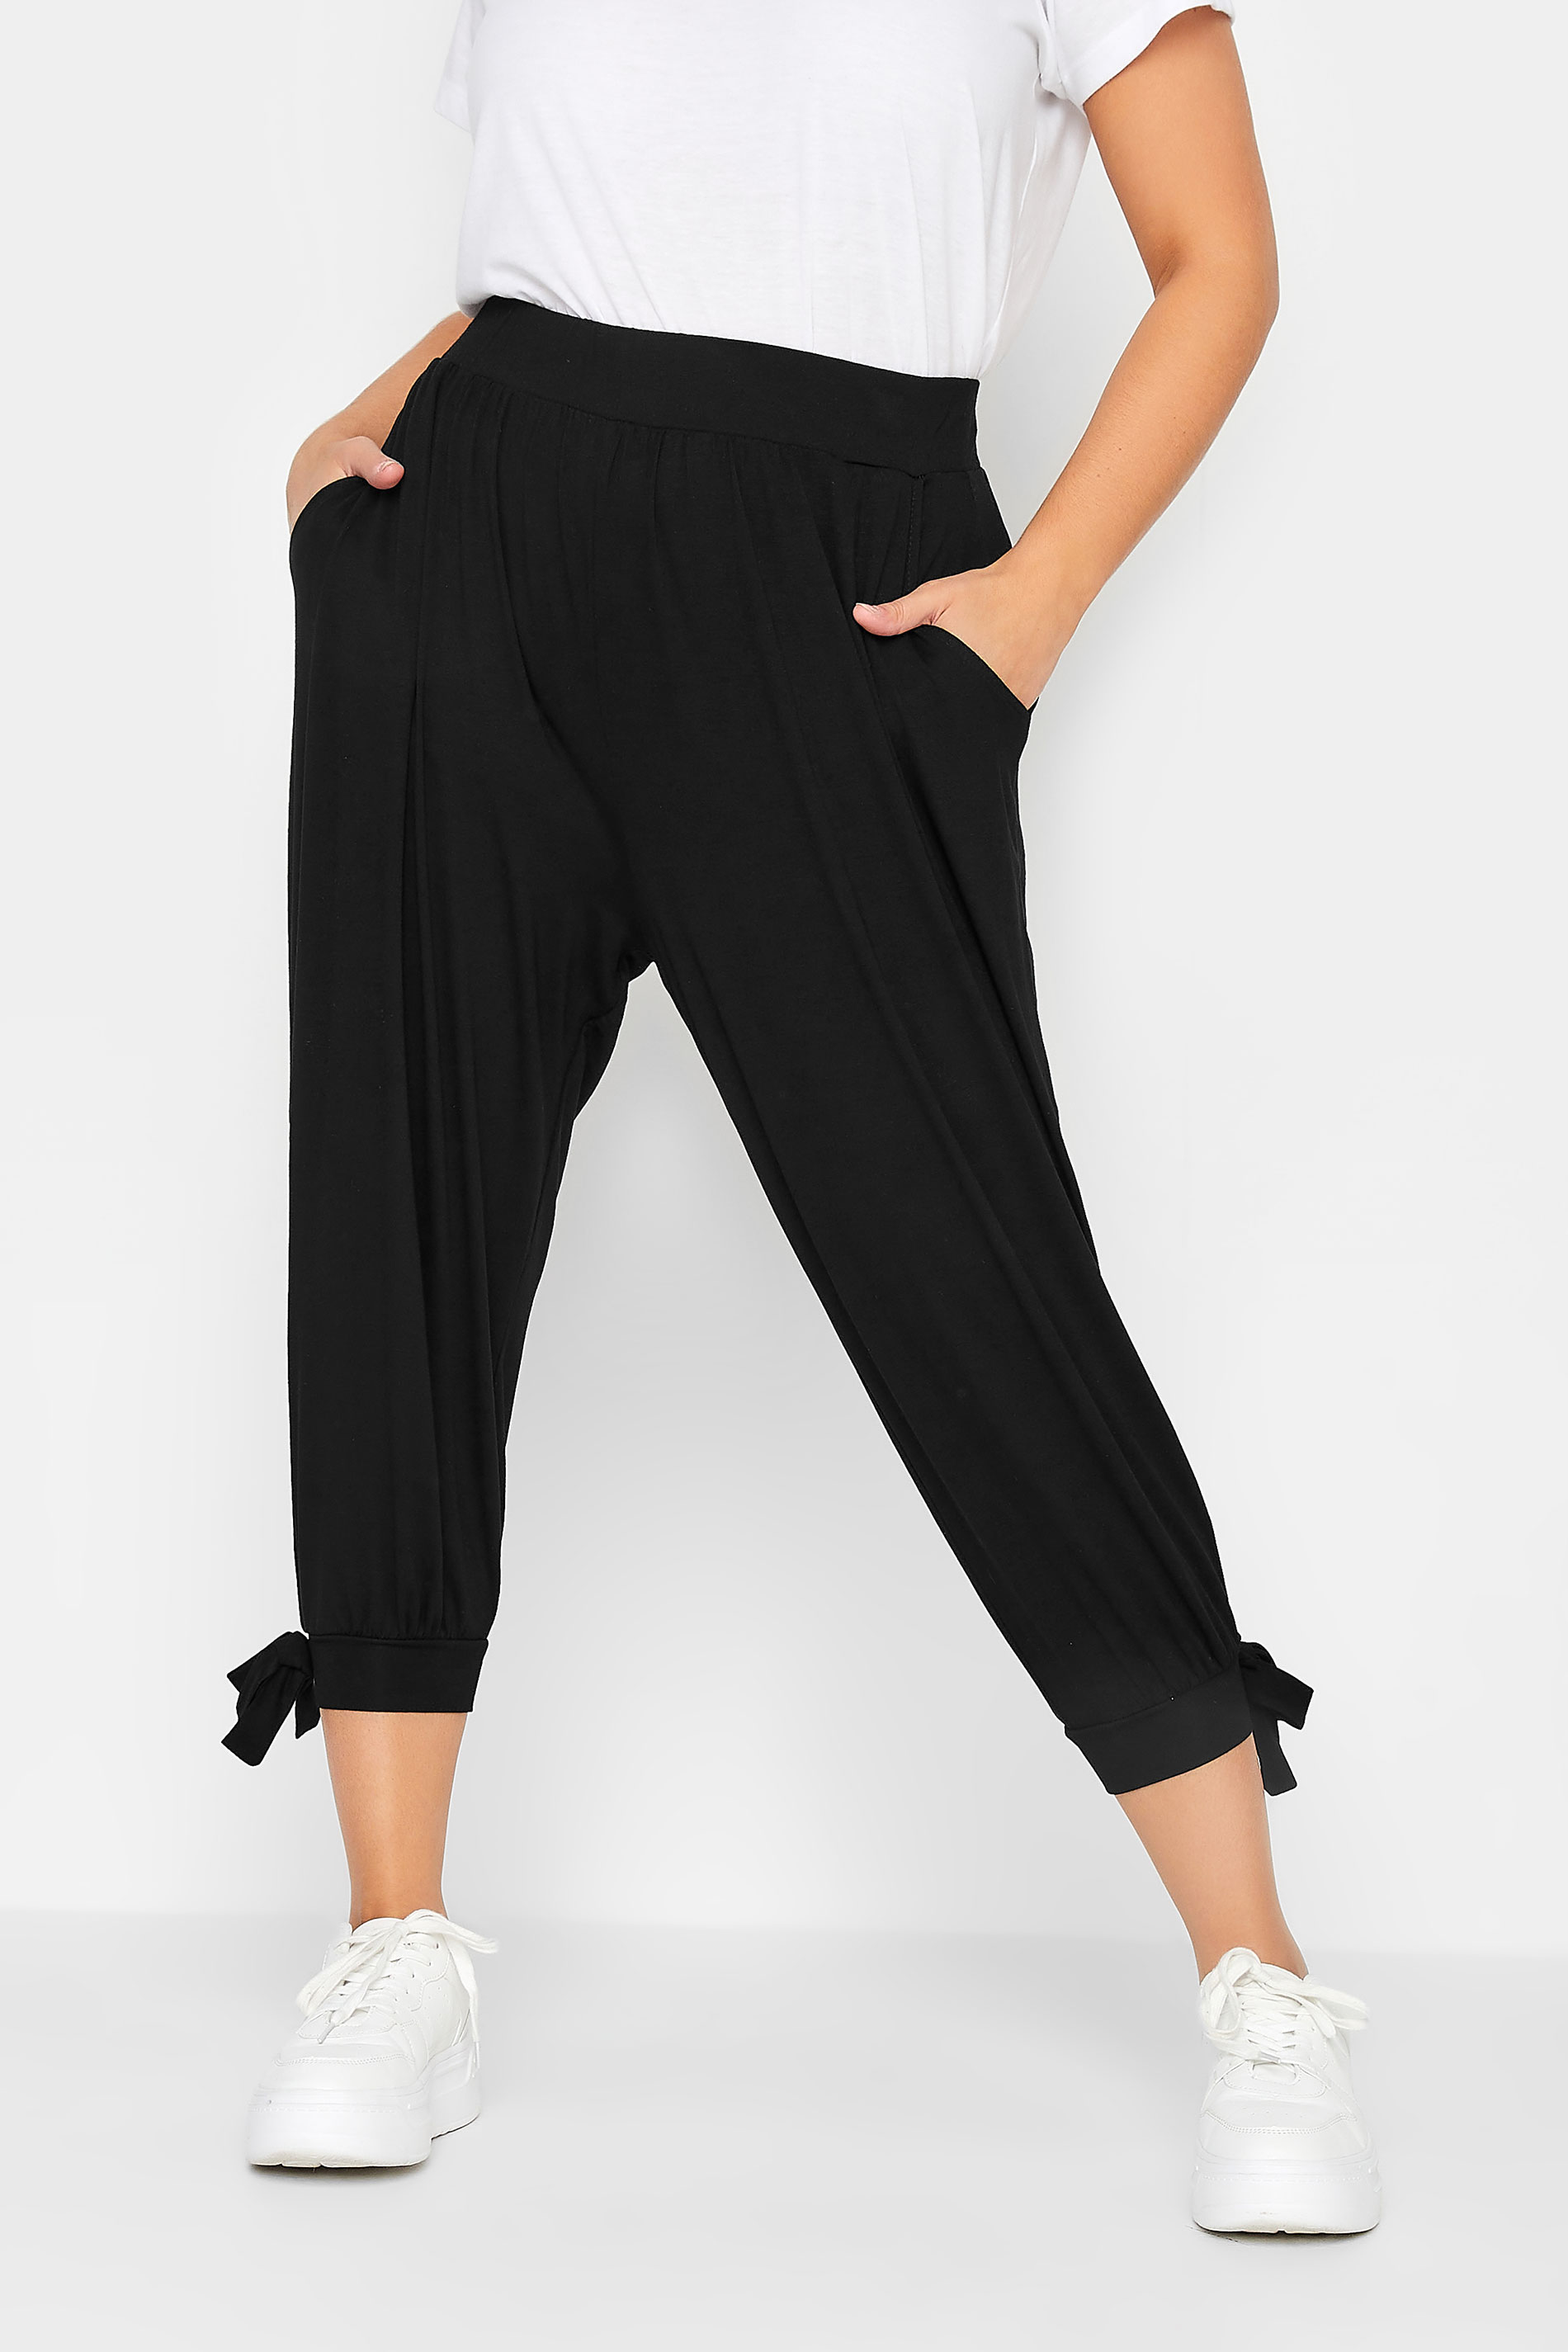 WearAll Womens Plus Size Cropped Harem Trousers Ladies 3/4 Plain Baggy Pants  Army 8-10 : Amazon.co.uk: Fashion